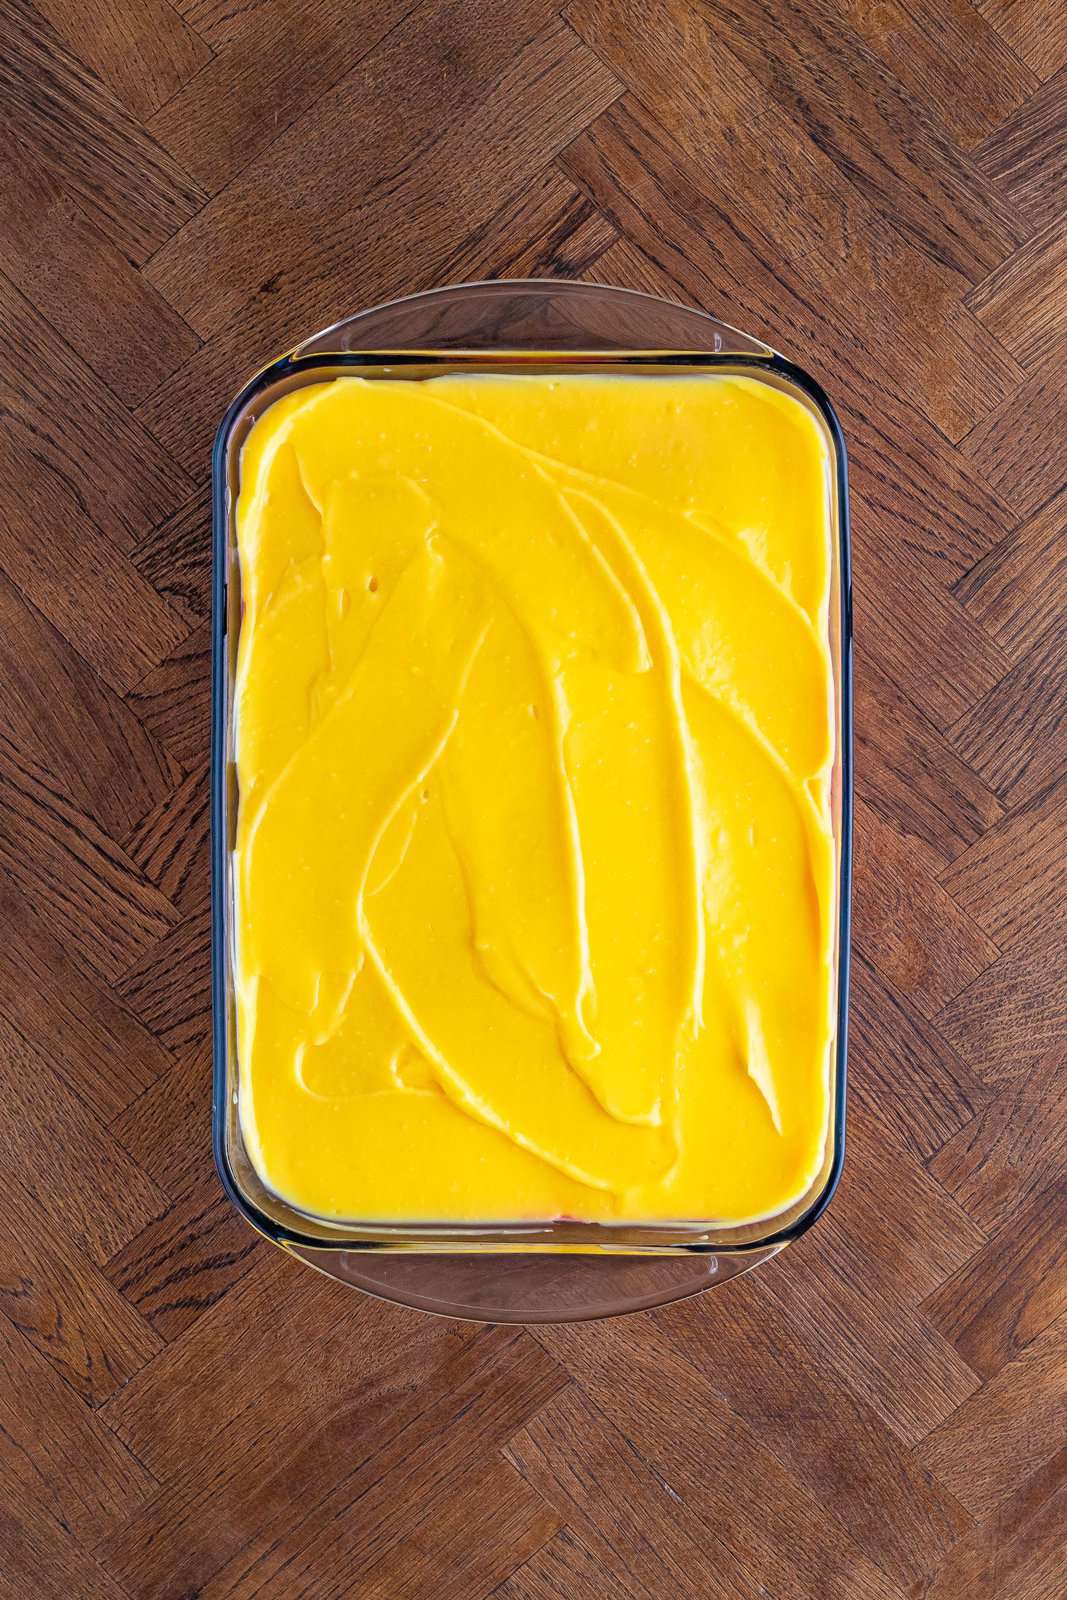 Vanilla pudding layer smoothed out over top in a baking dish.